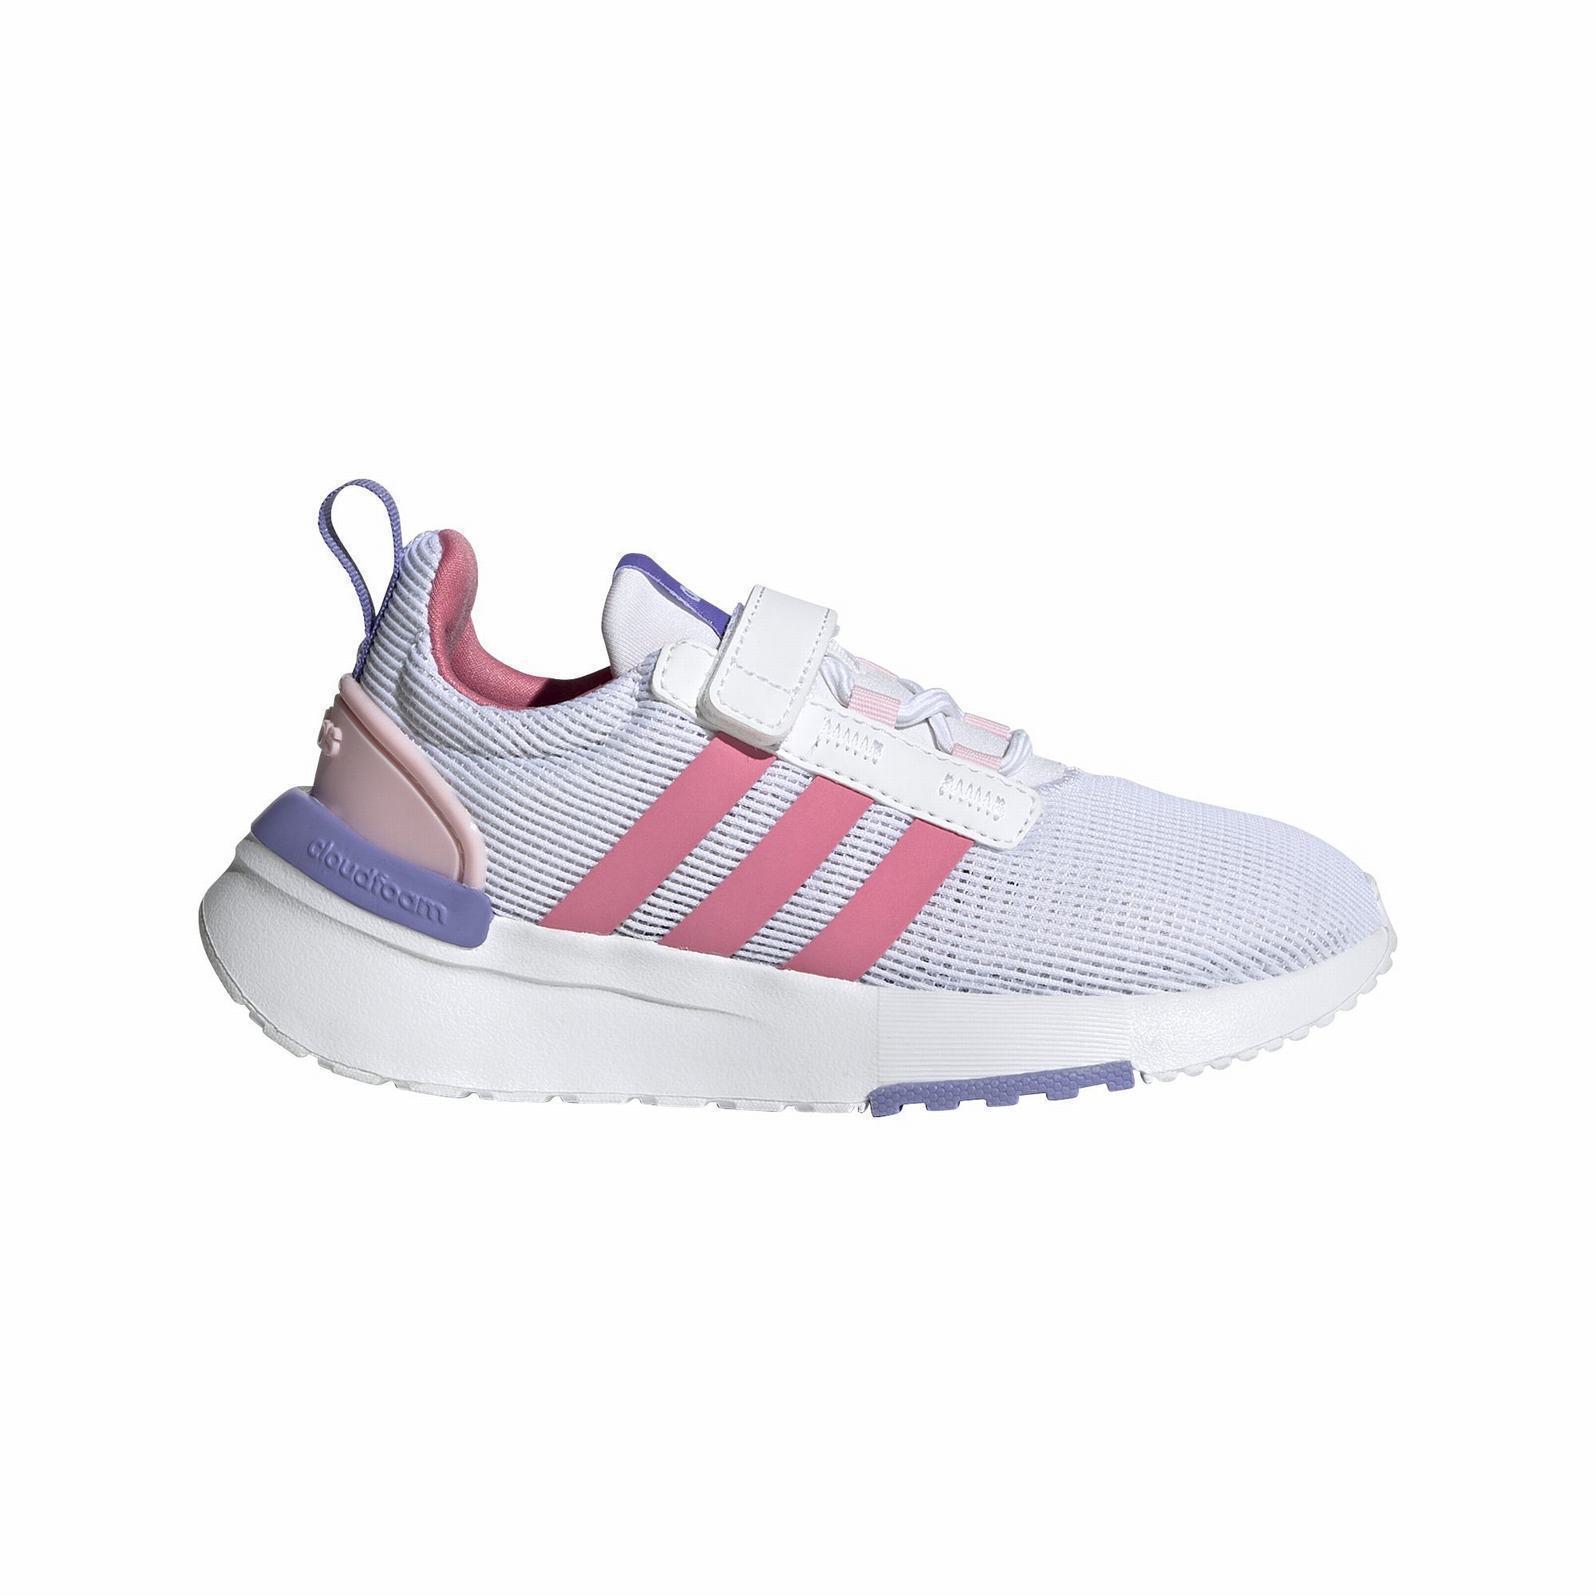 Adidas Racer TR21 Ps White